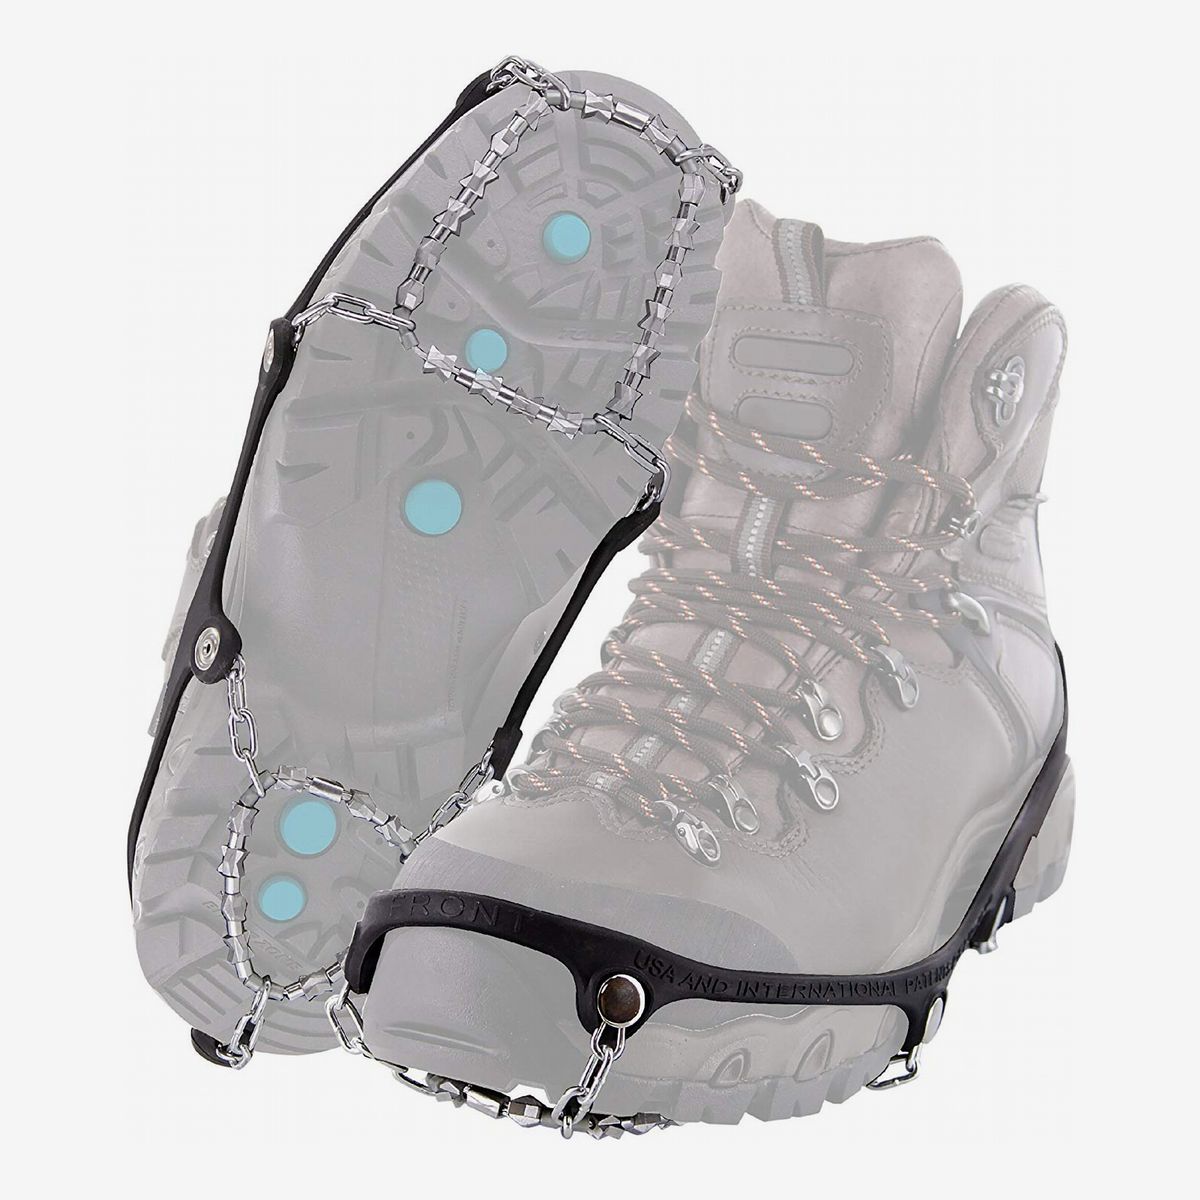 Ice Cleats Crampons Traction Snow Grips for Boots Shoes Adults or Kids Including Portable Carry Bag & Adjustable Strap Anti-Slip Stainless Steel Spikes & Durable Silicone Safe Protect for Hiking Fishing Climbing and Mountaineering 